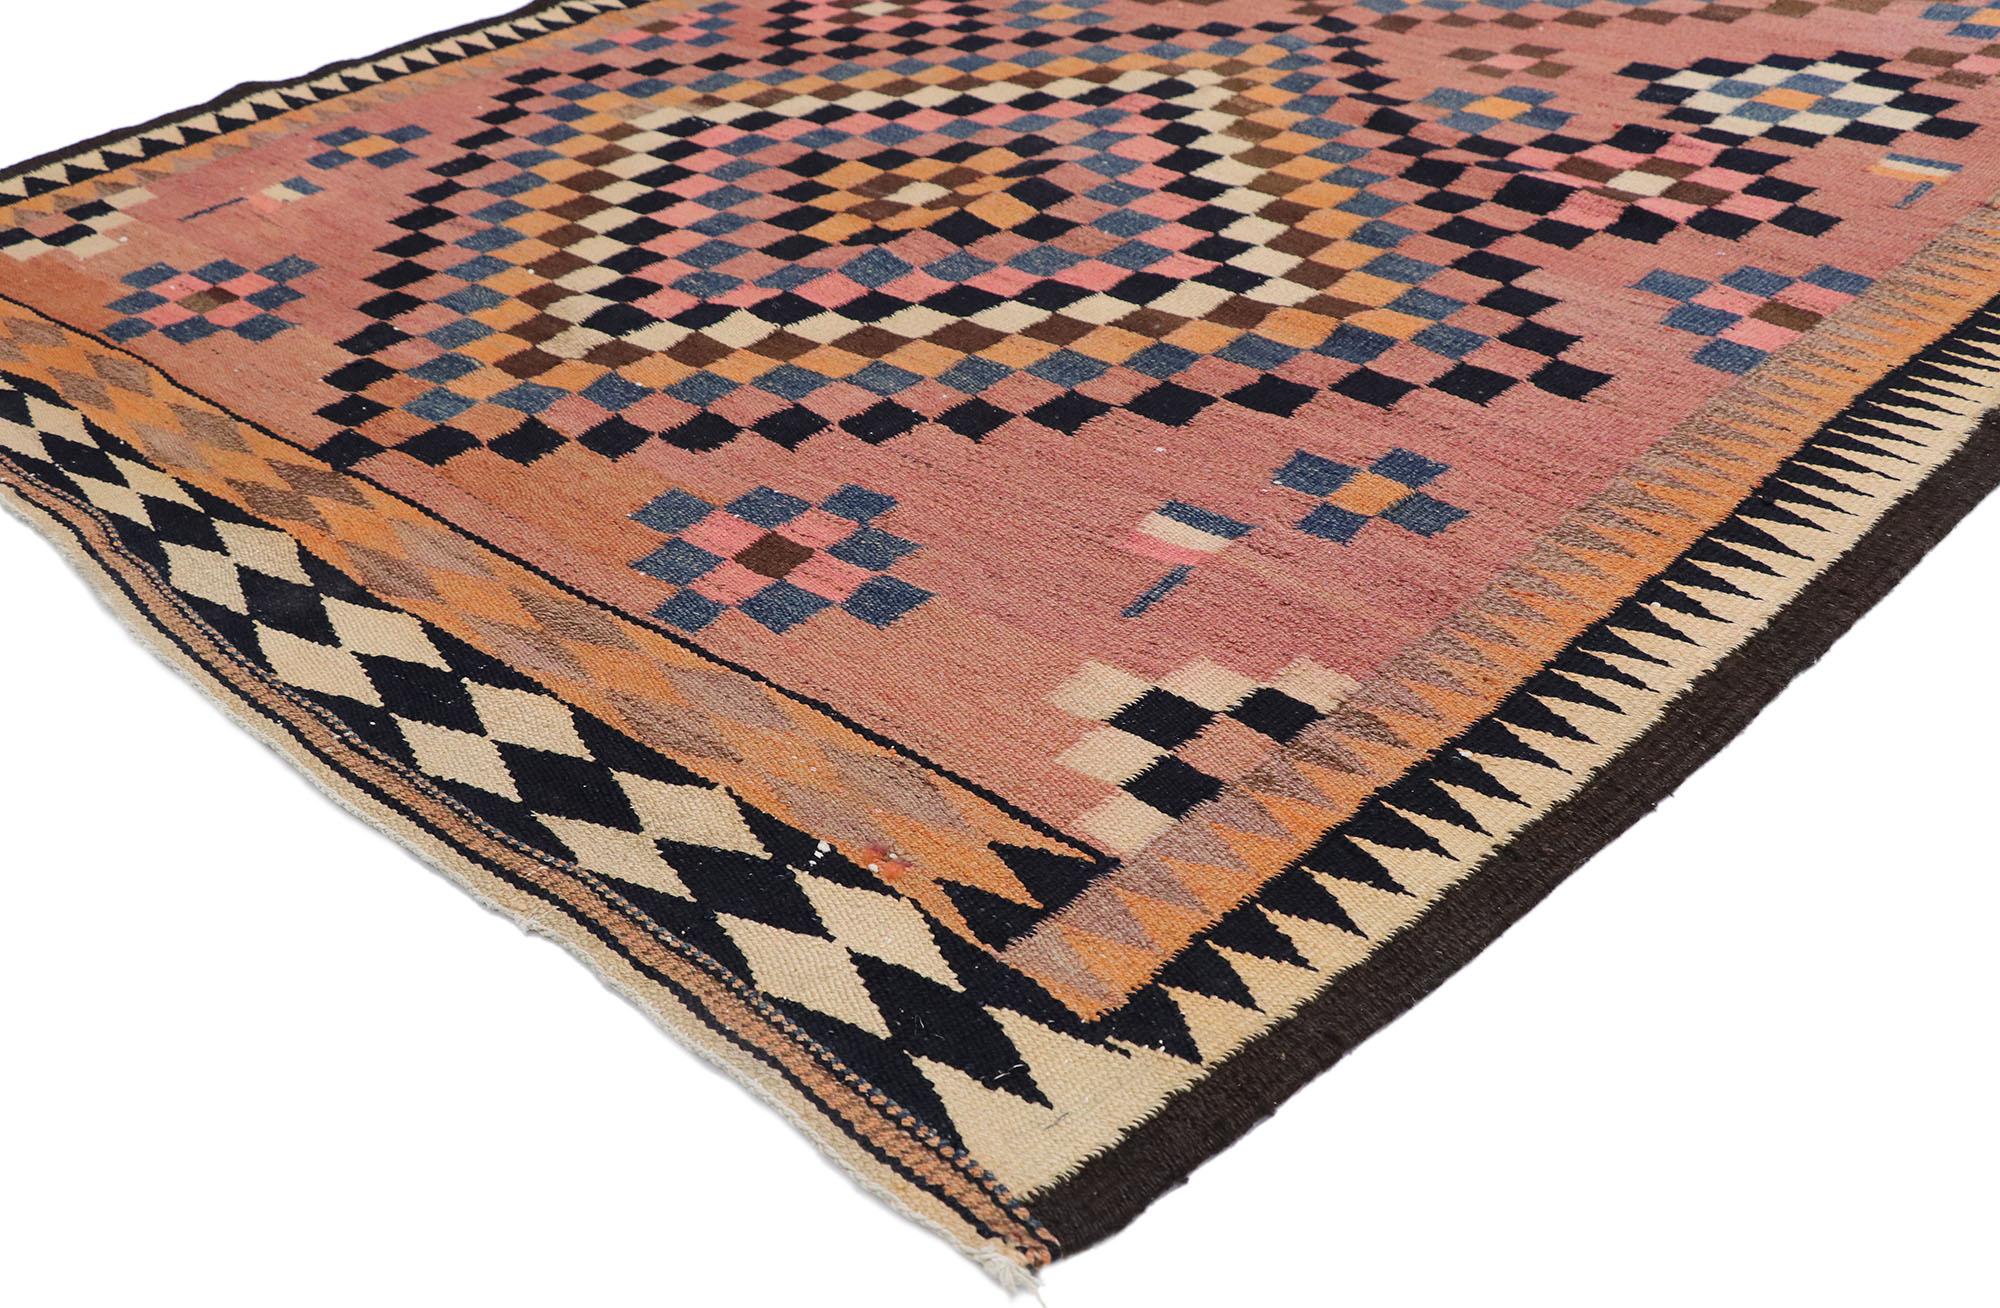 78056 vintage Persian Shiraz Kilim Gallery rug with Boho Chic Tribal style 05'03 x 11'01. Full of tiny details and a bold expressive design combined with vibrant colors and tribal style, this hand-woven wool vintage Persian Shiraz kilim gallery rug